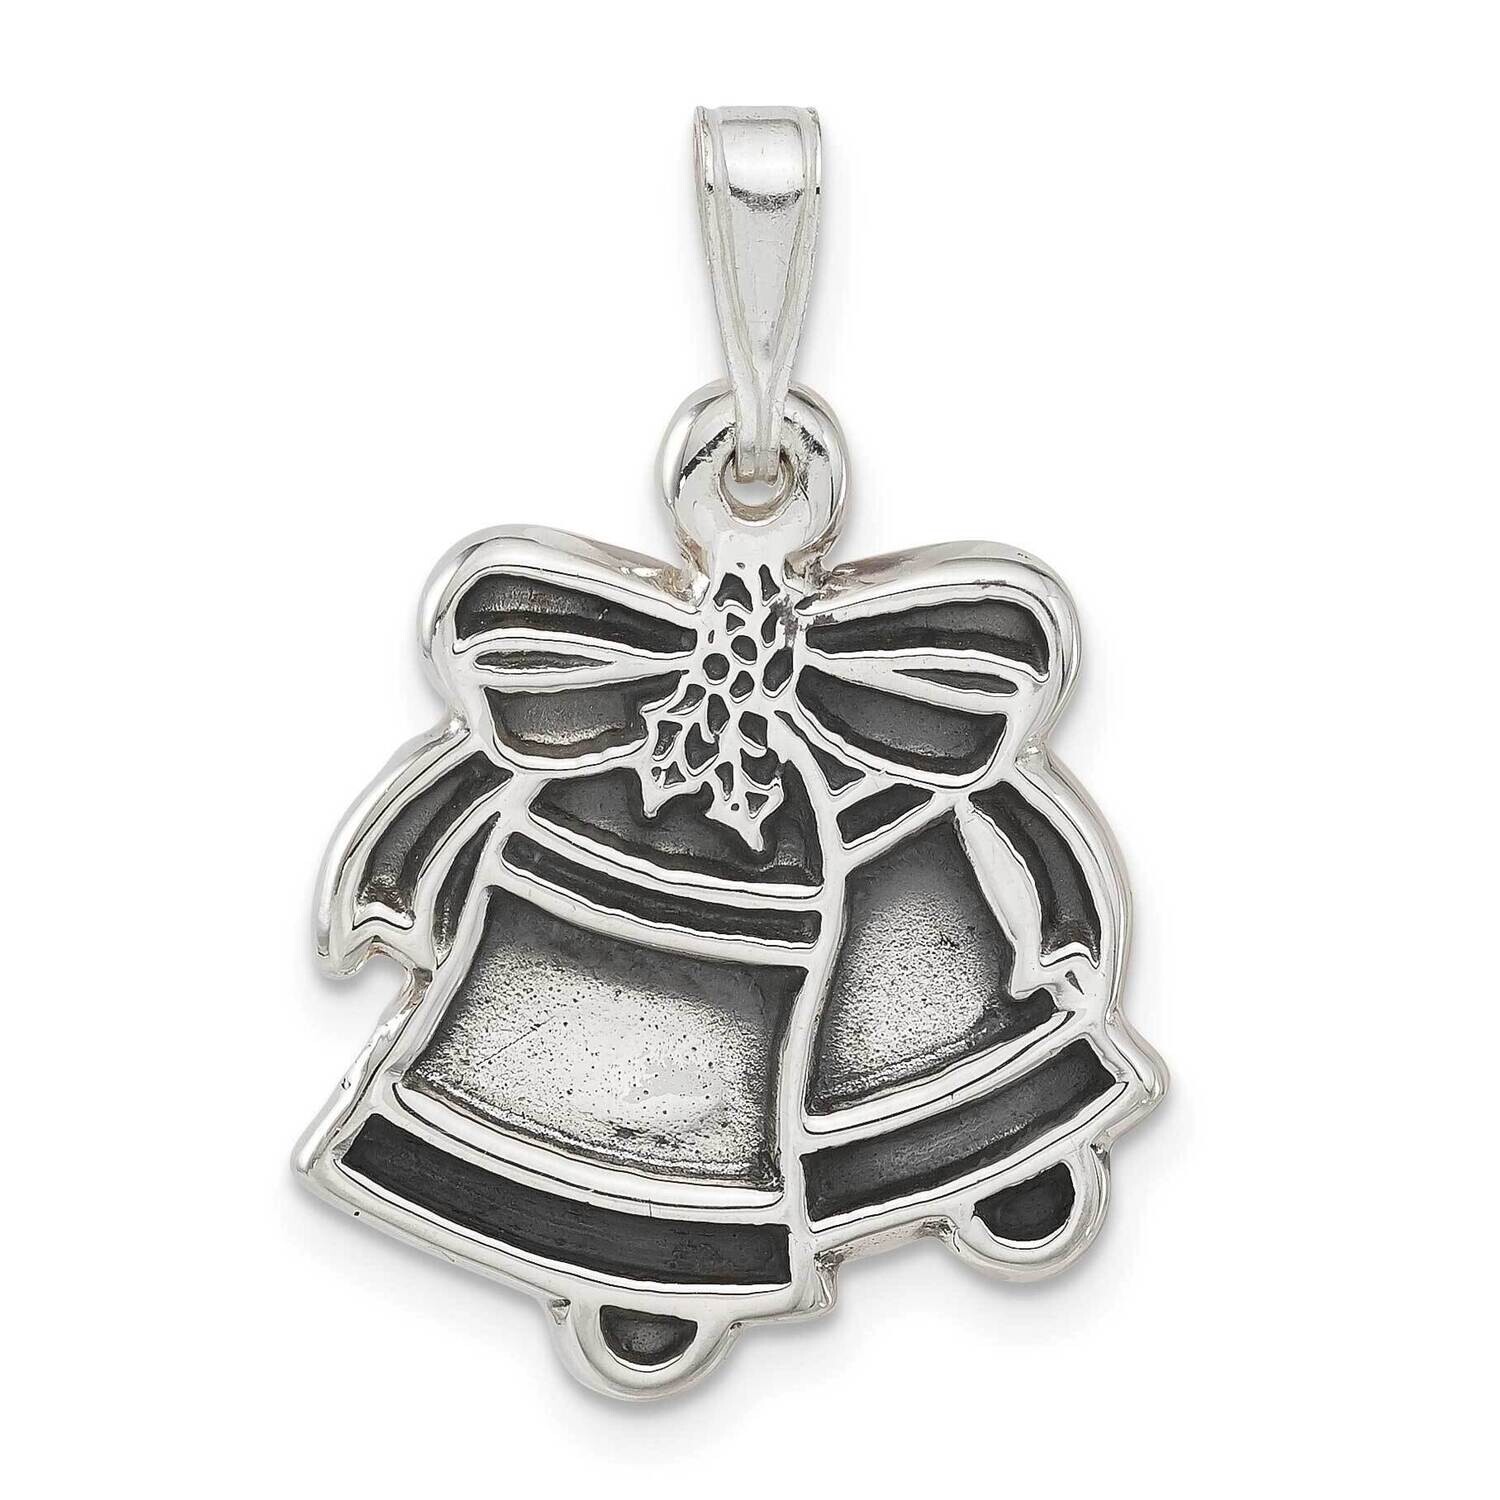 Antiqued Bells Charm Sterling Silver QC3812